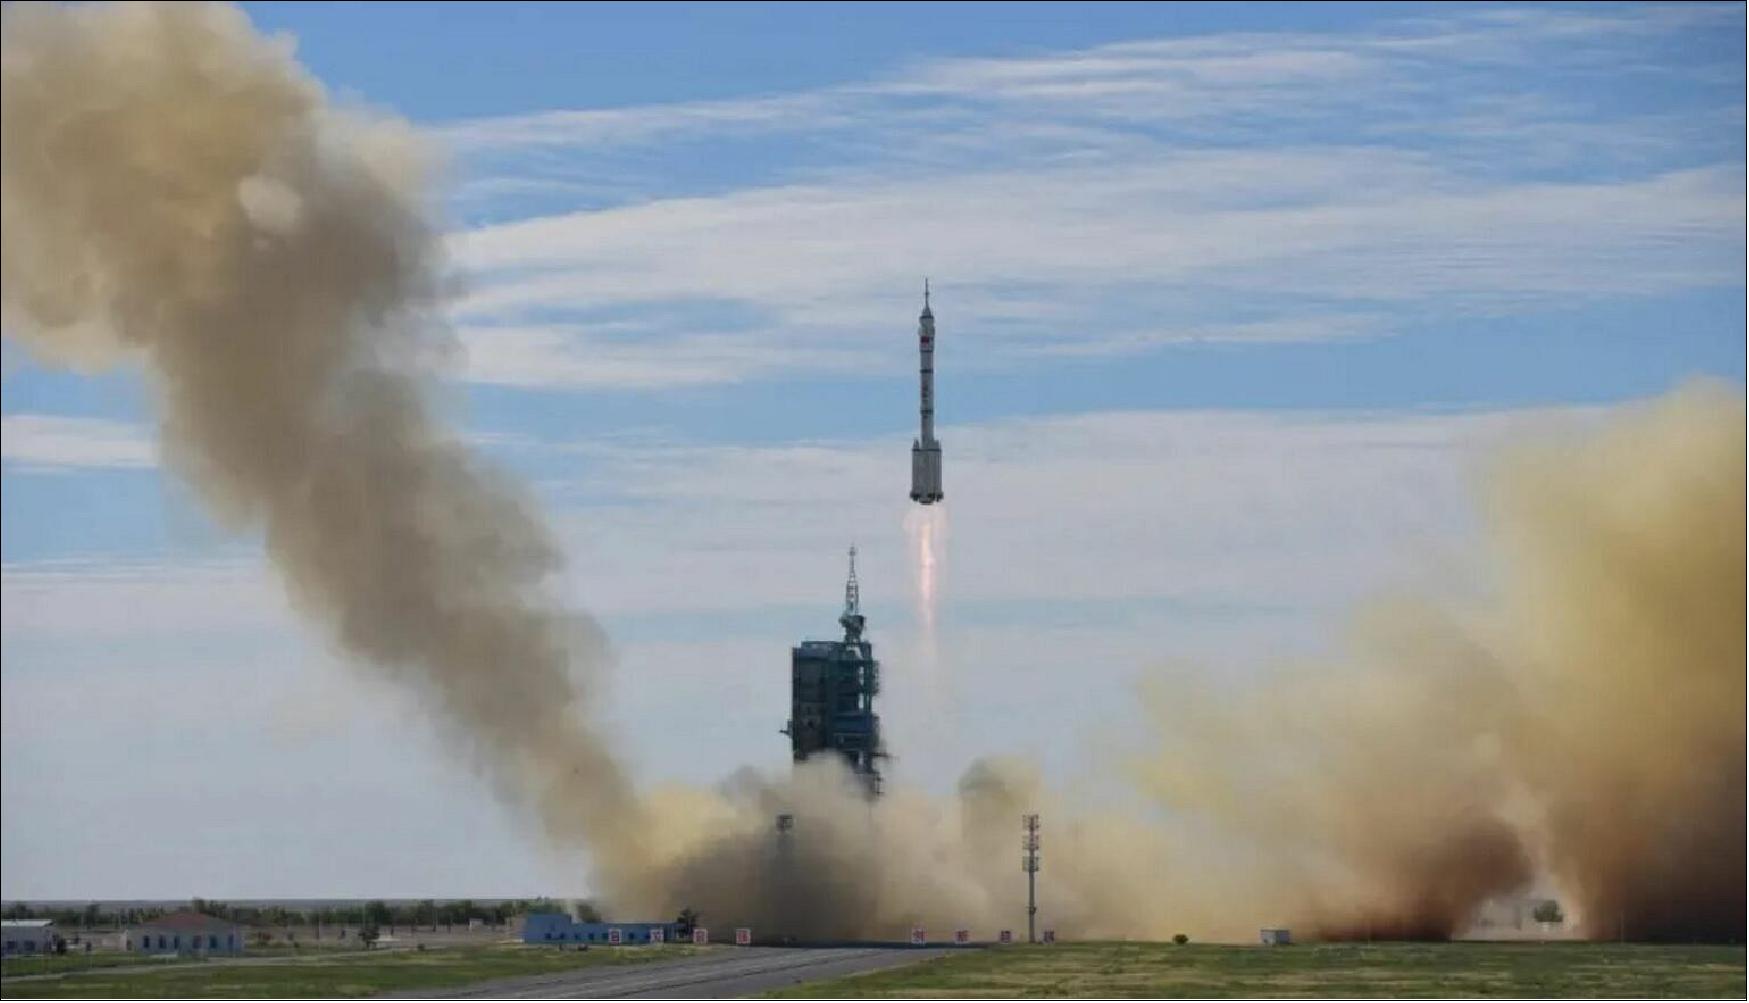 Figure 39: Liftoff of the Long March 2F carrying Shenzhou-12 at 01:22 UTC on June 17 (image credit: CASC)